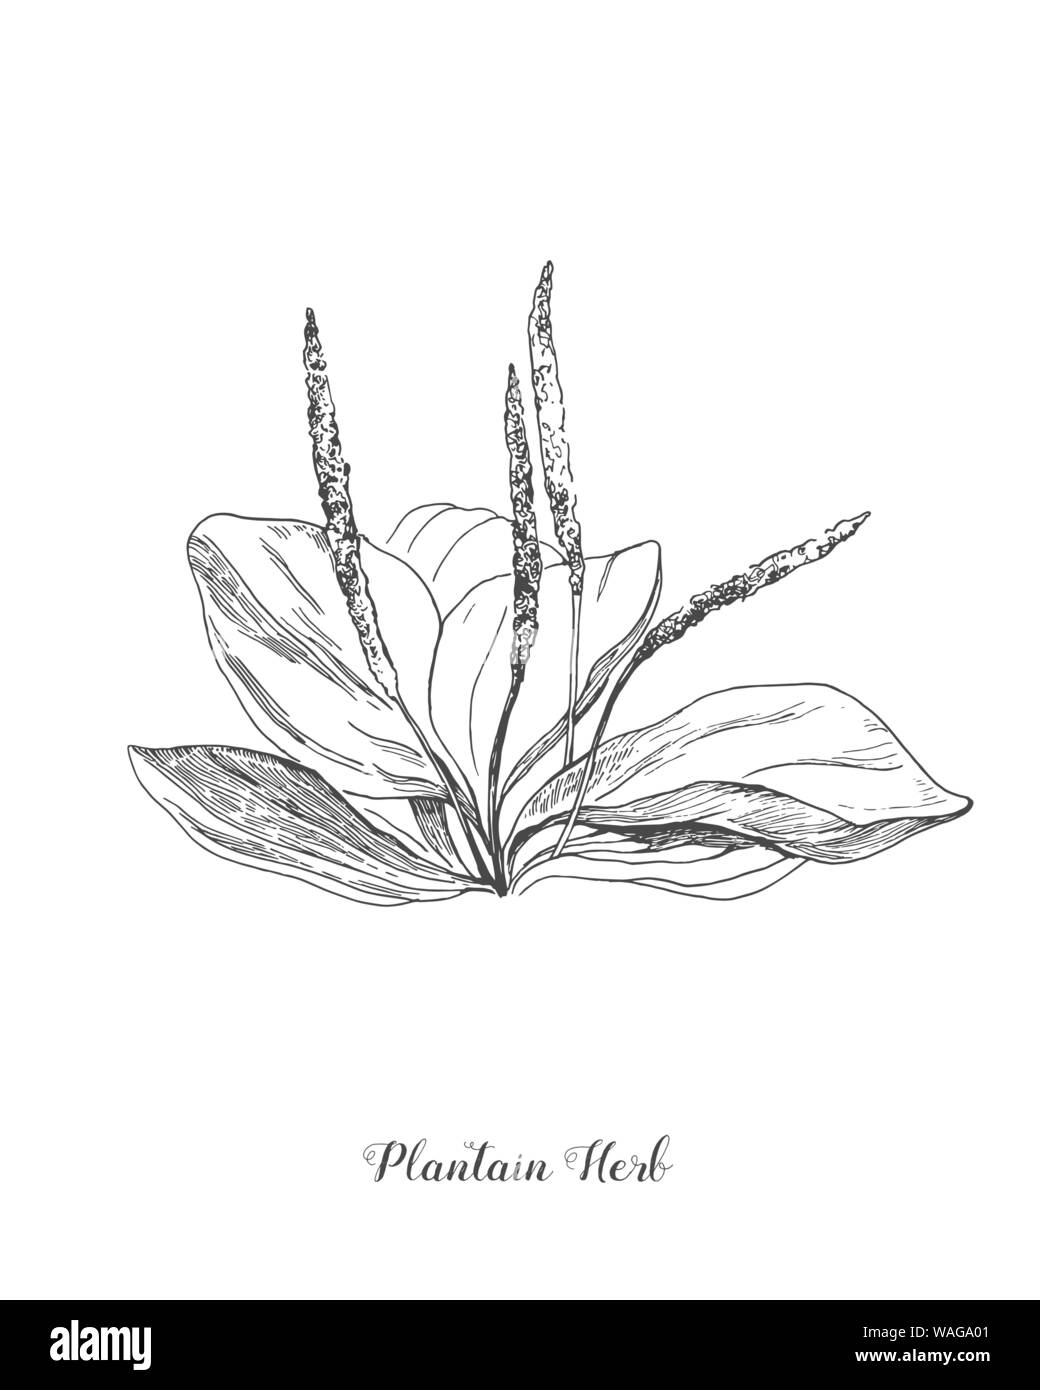 Plantain. Botanical Illustration. Medicinal plant wild field flower. Sketch.Hand drawn outline vector illustration, isolated floral elements for Stock Vector